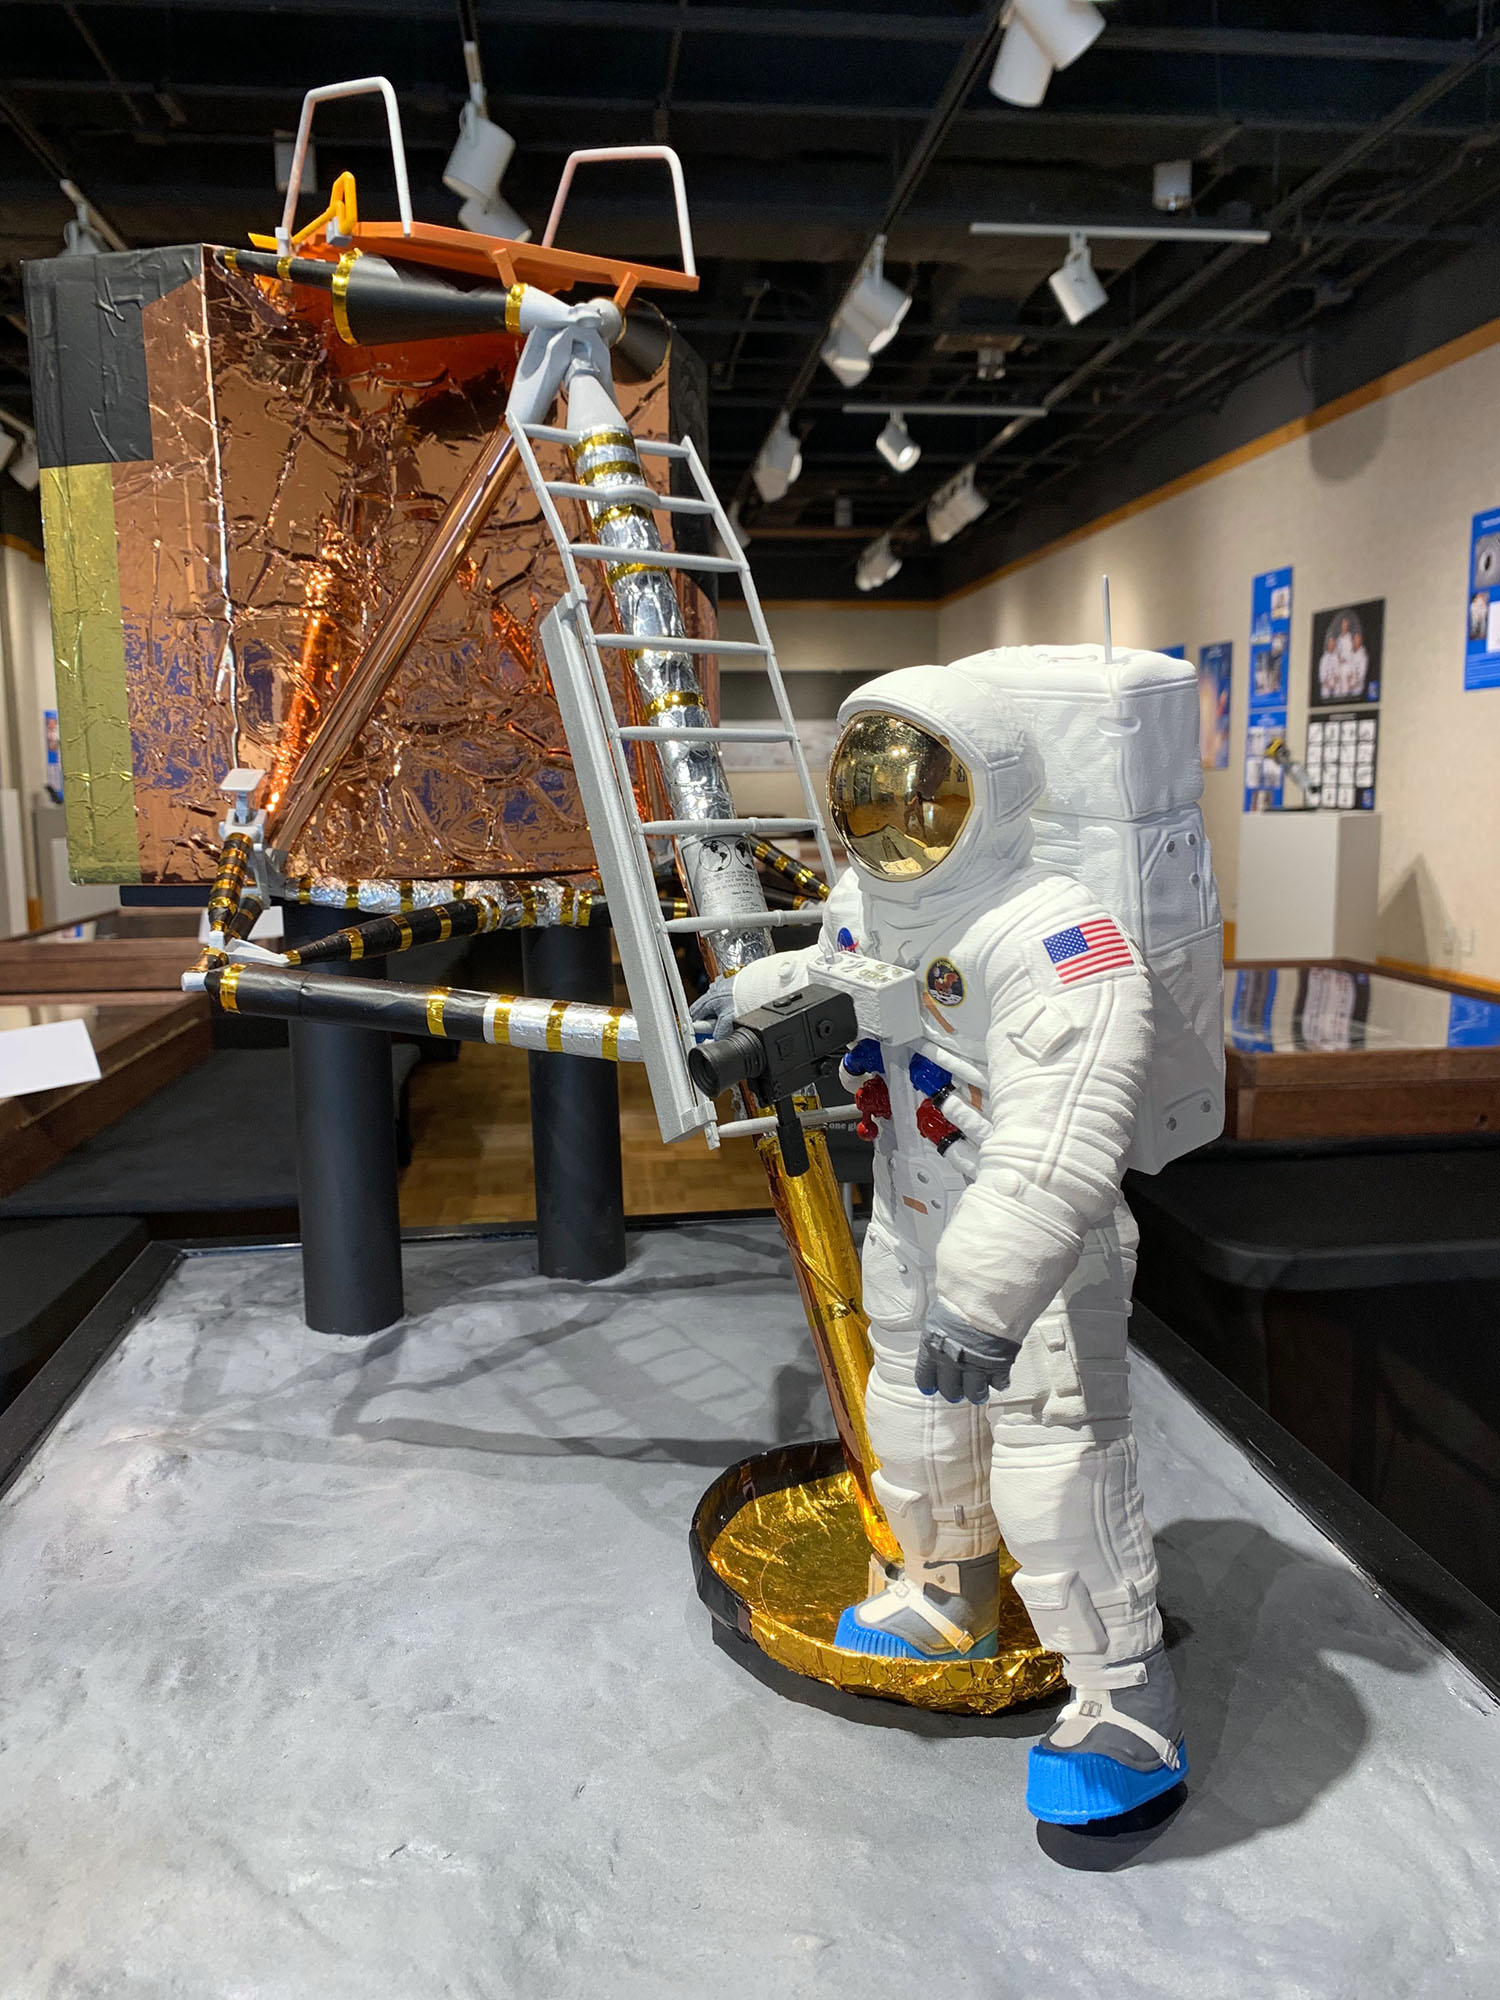 diorama of Astronaut holding onto a ladder